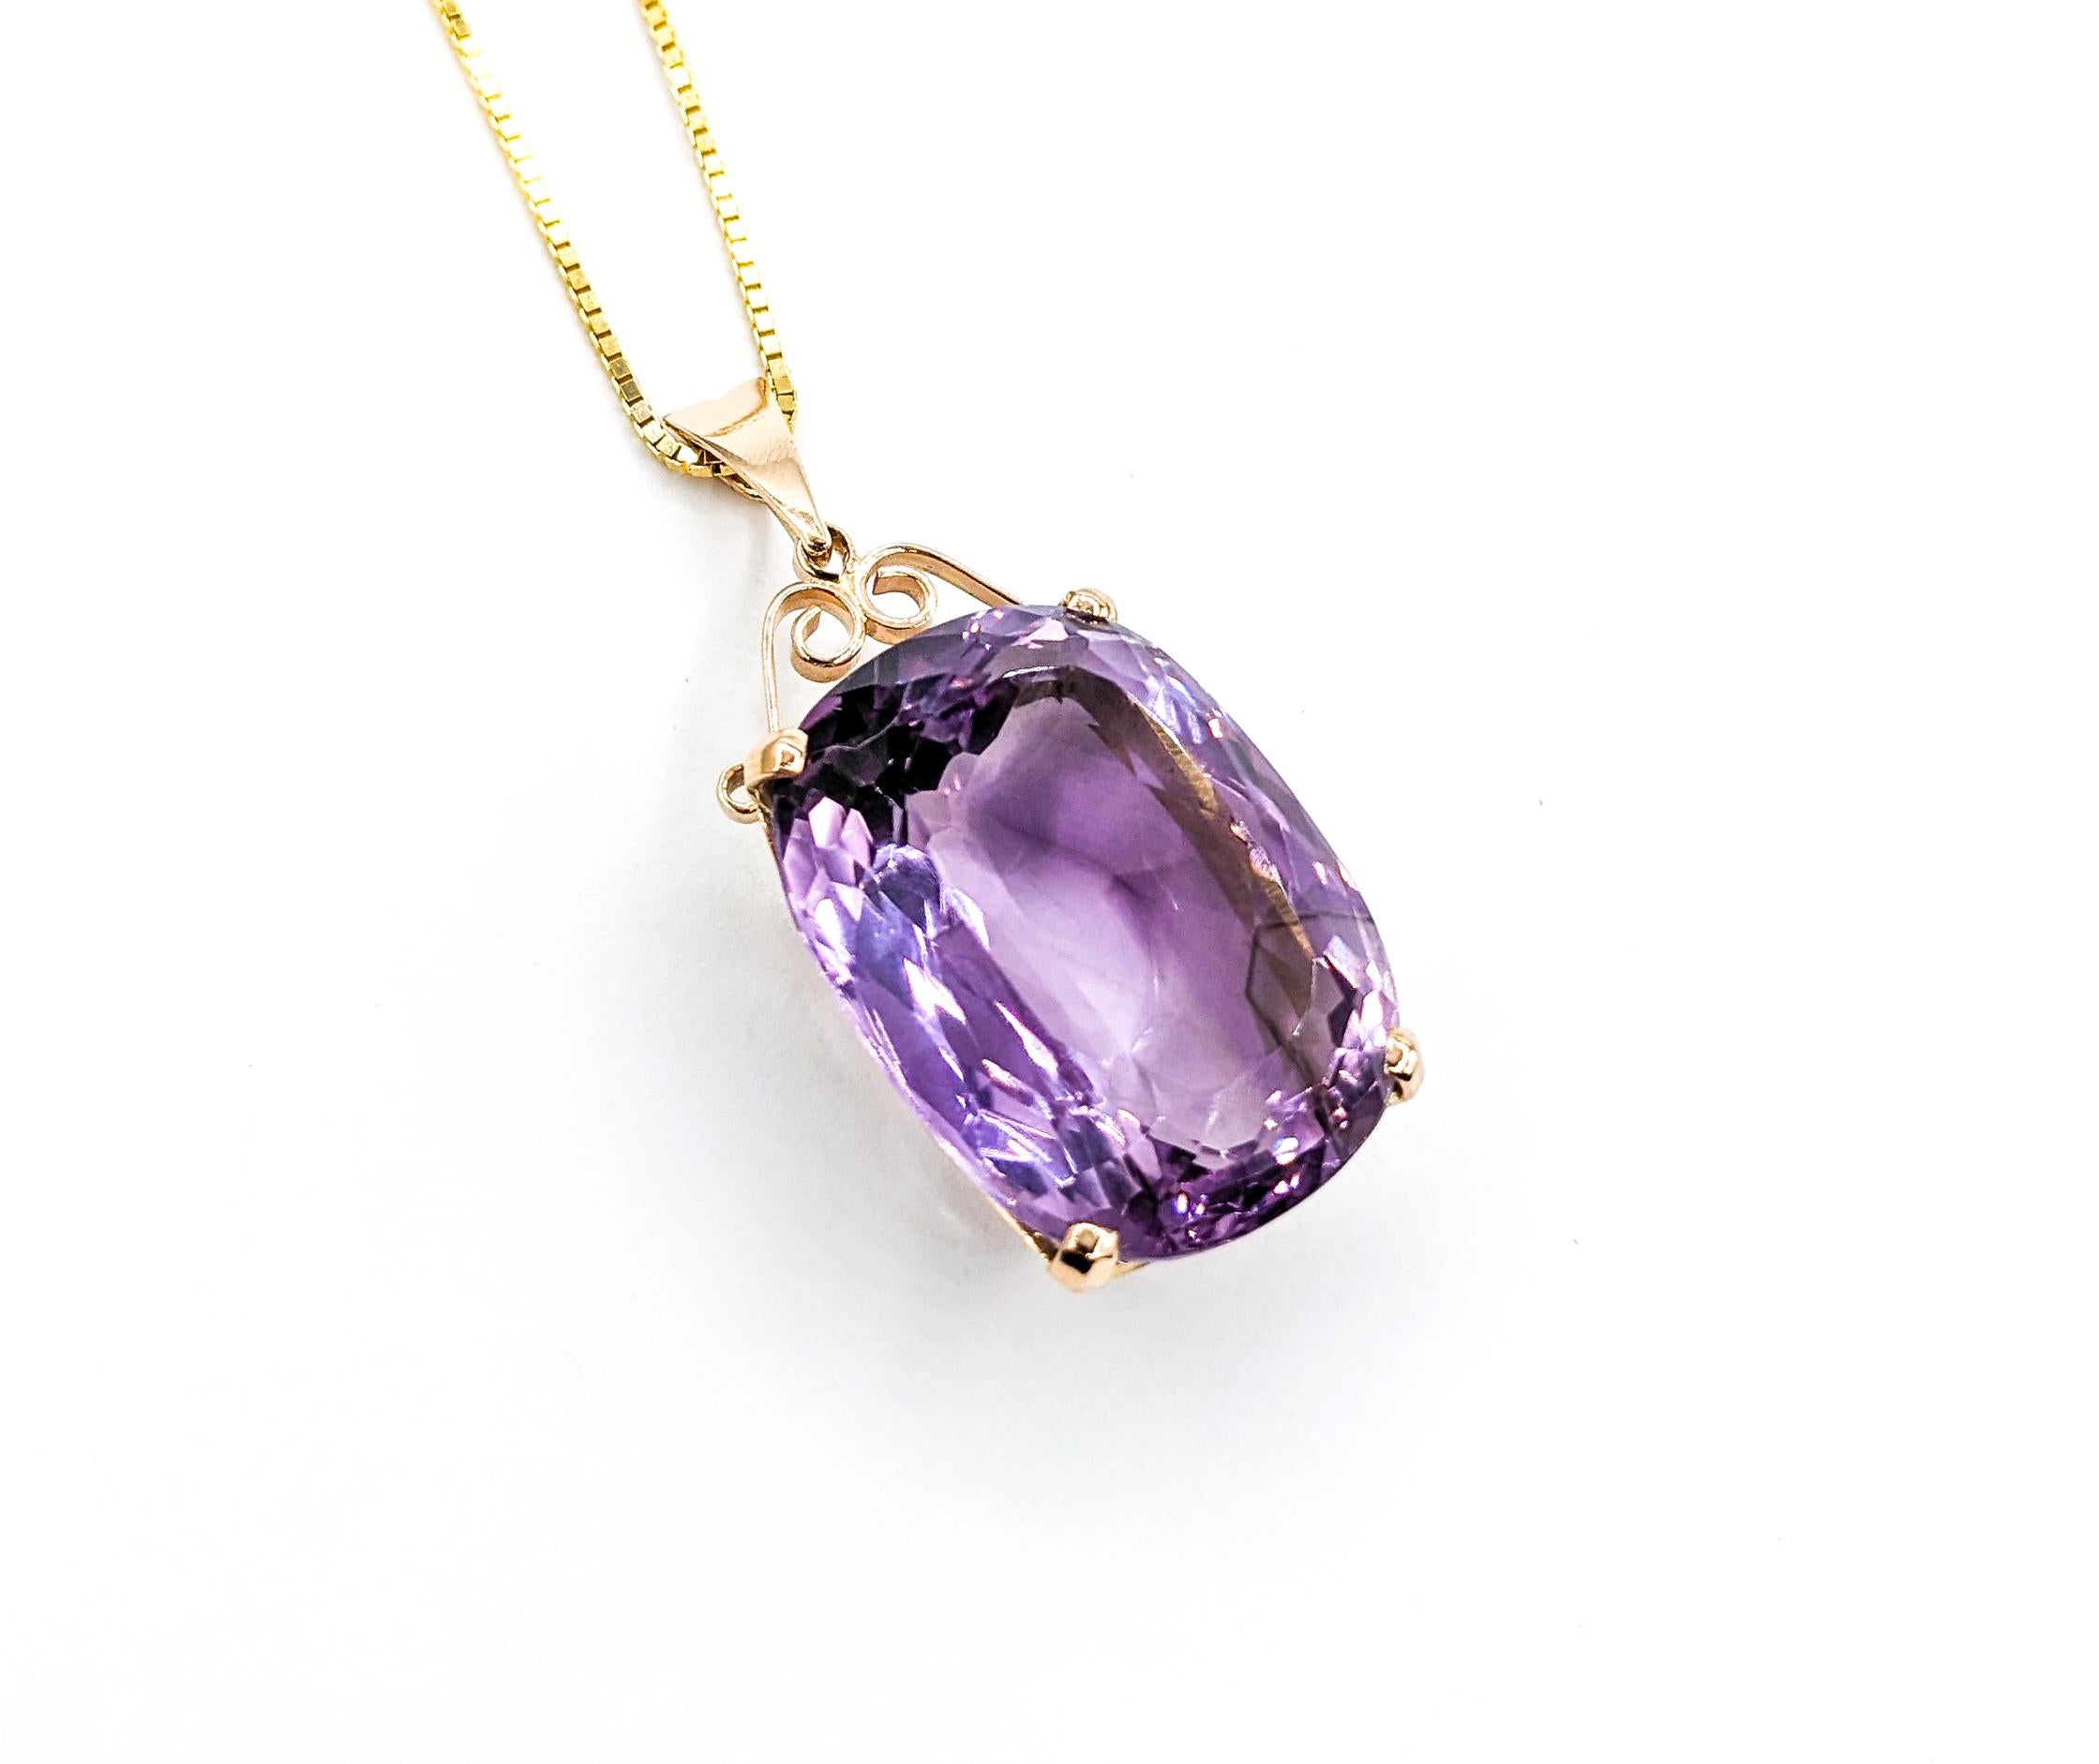 46ct Amethyst Pendant With Chain In Yellow Gold For Sale 3